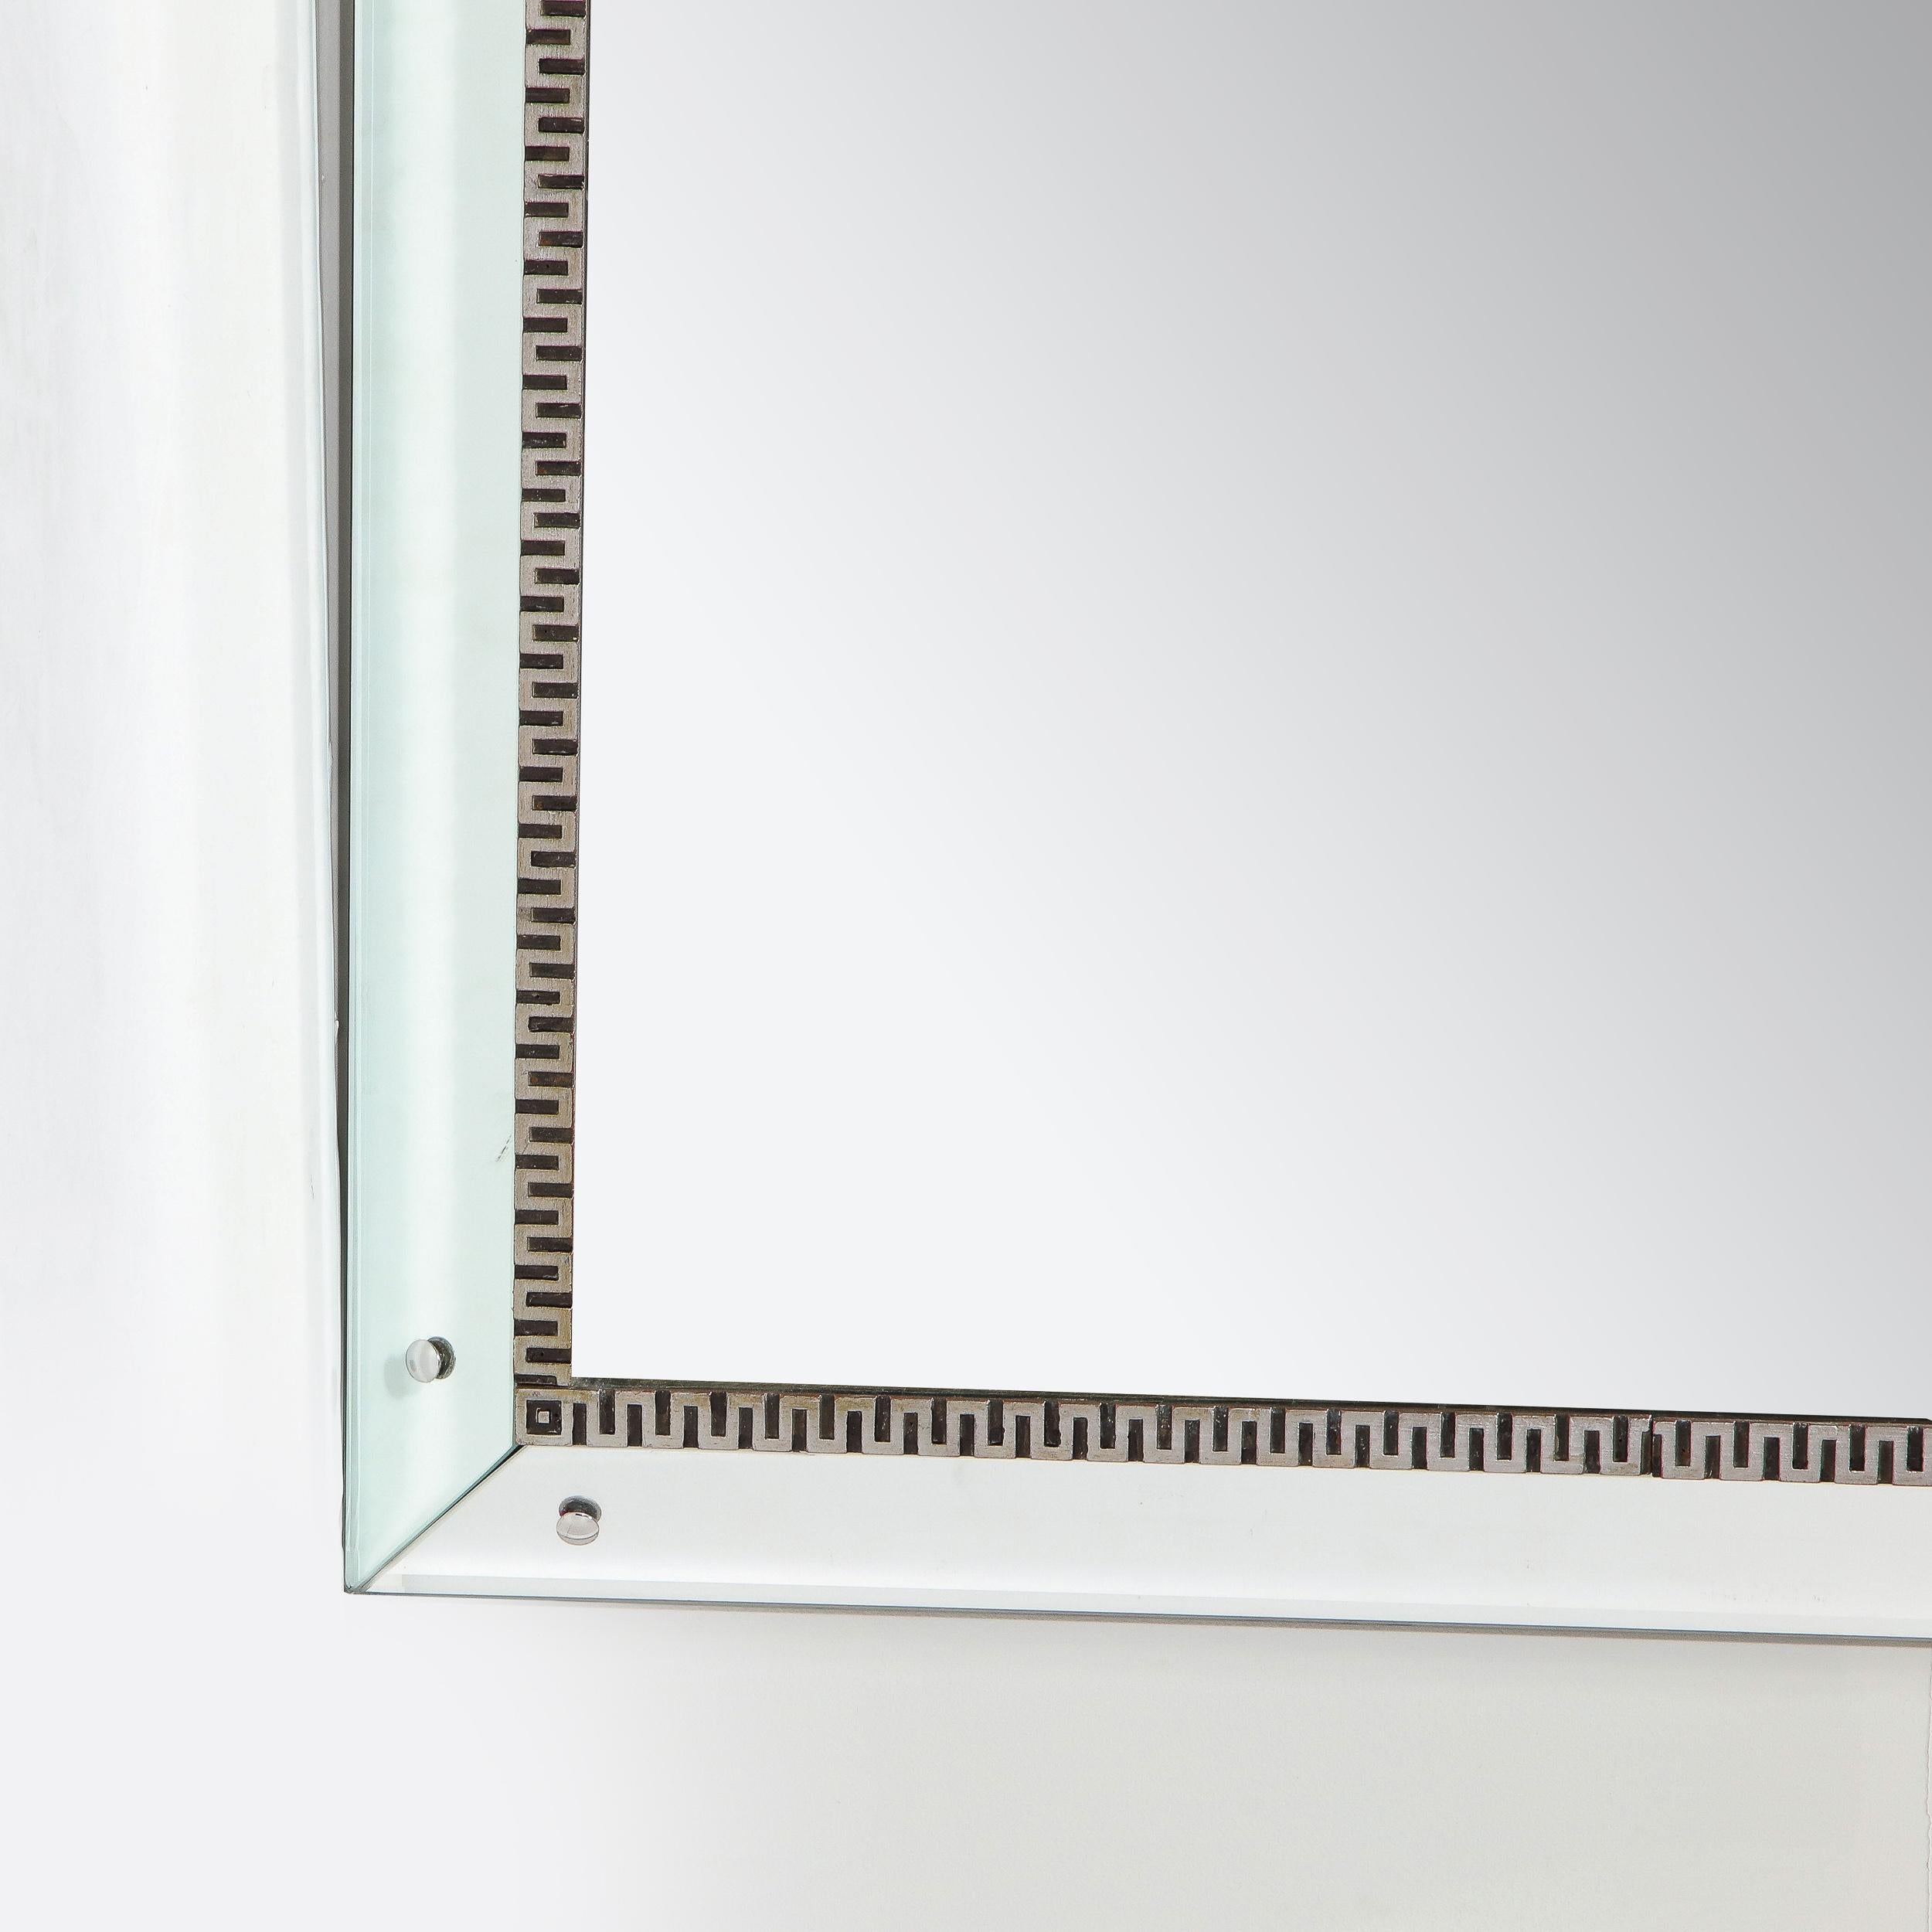 This elegant and understated Mid-Century Modern mirror was realized in the United States, circa 1950. It offers an austere rectangular form with a mirrored border and a plain mirrored center separated by a stylized greek key motif border executed in